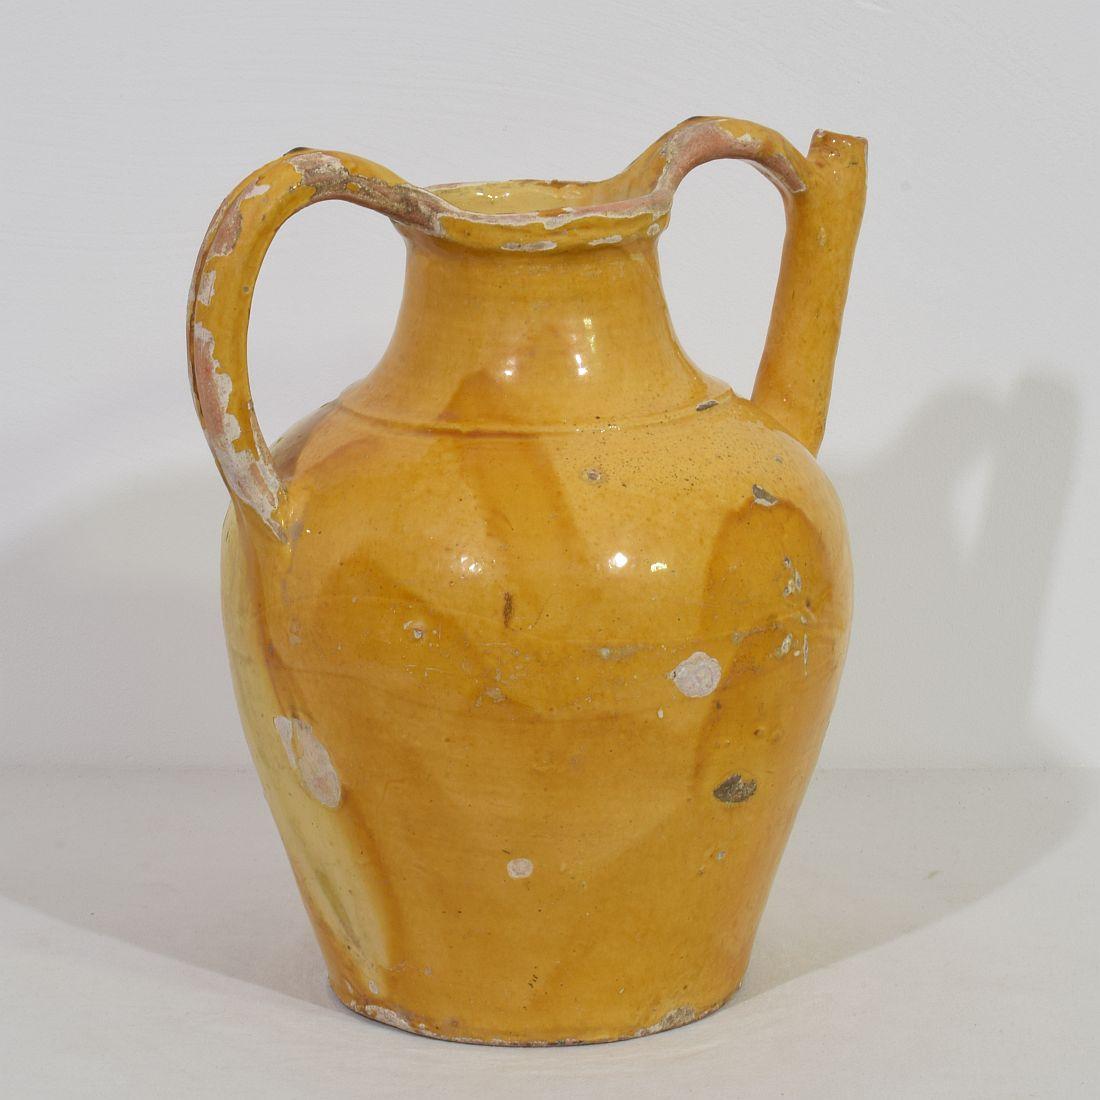 French Provincial Large 19th Century French Yellow Glazed Terracotta Jug or Water Cruche, 'Orjol' For Sale